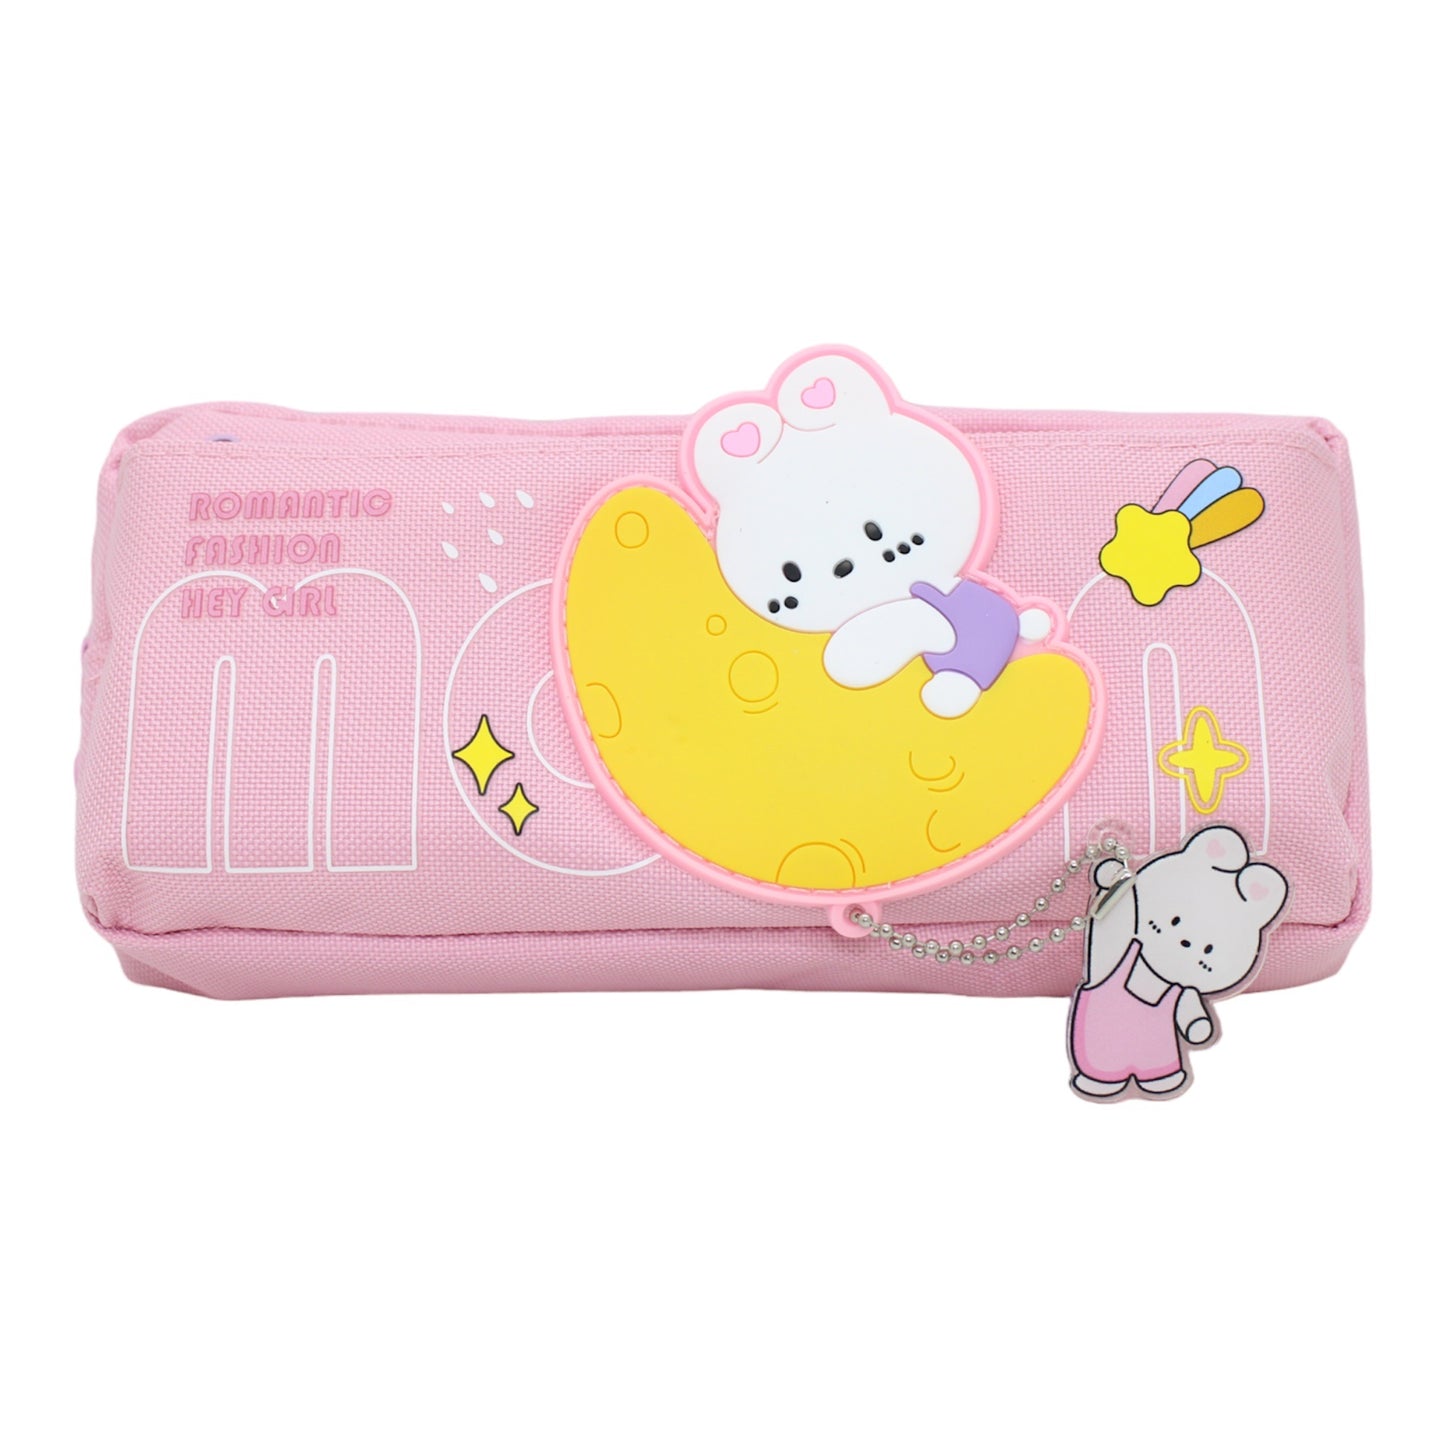 FOLKSBOXX Pencil Case Large Capacity Stationery Bag, Side Pockets Pouch with Zipper Closure Portable Makeup Case Cute for Students Girls Adults Office